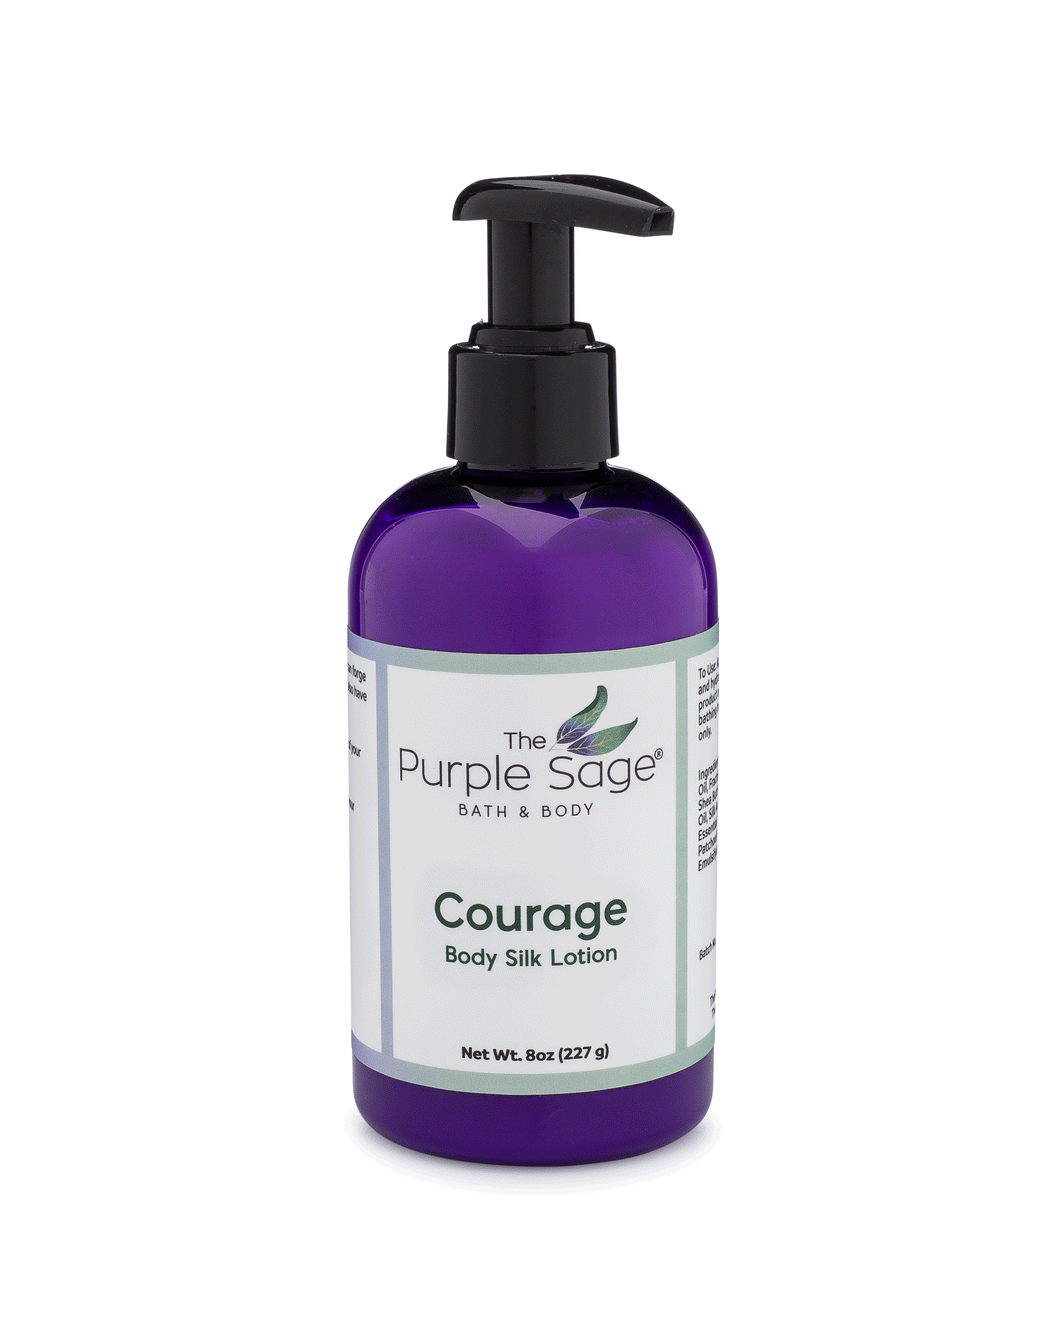 Courage Lotion from The Purple Sage